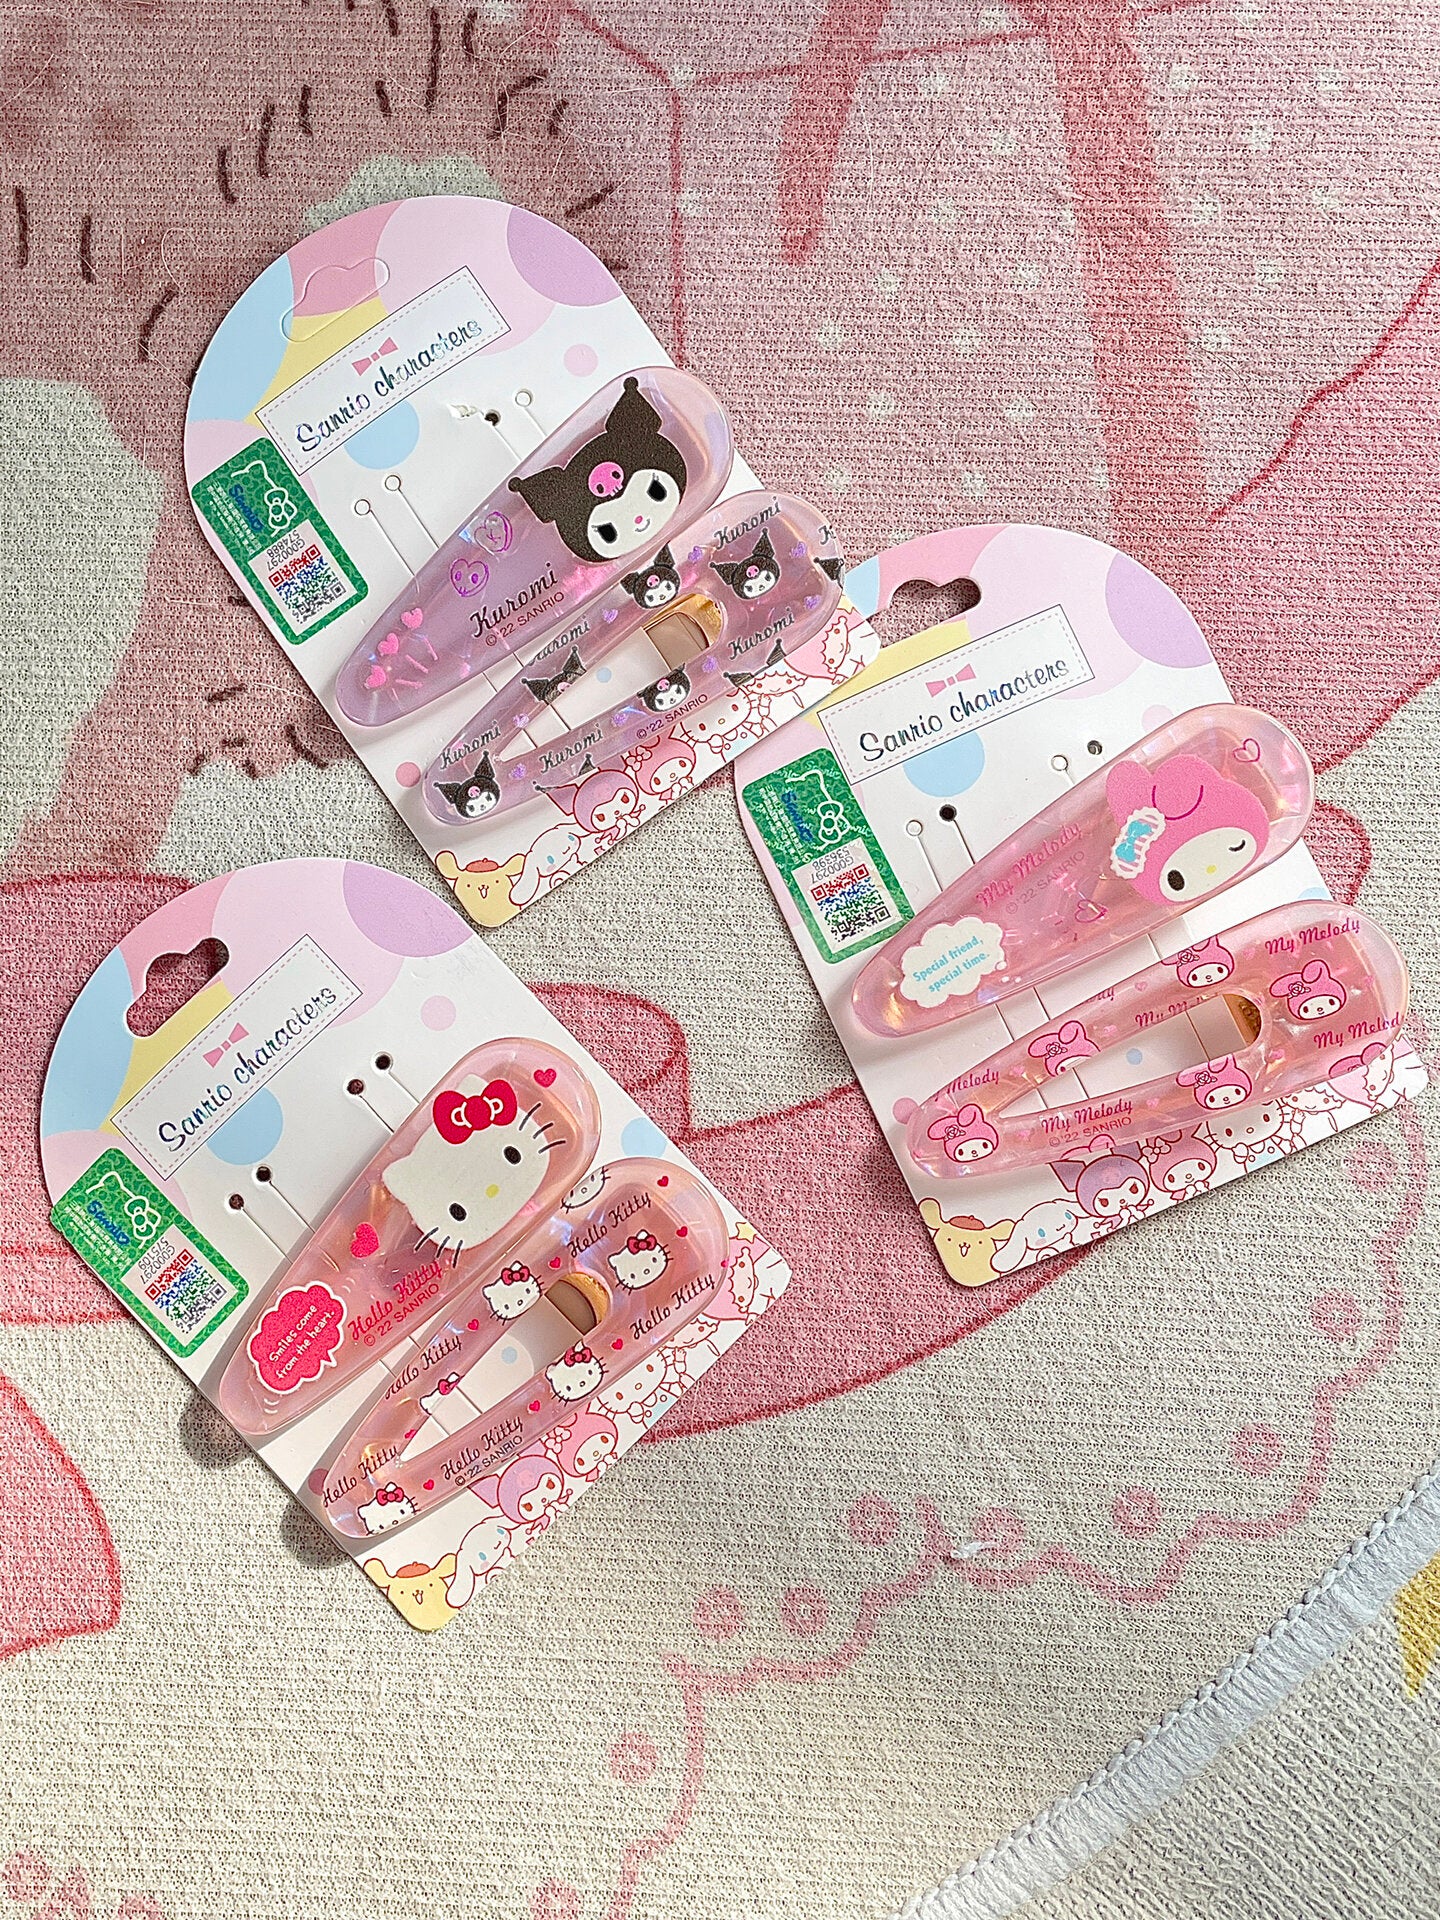 12PCS Sanrio Hair Clips for Women Girls Hair Styling Tools Accessories